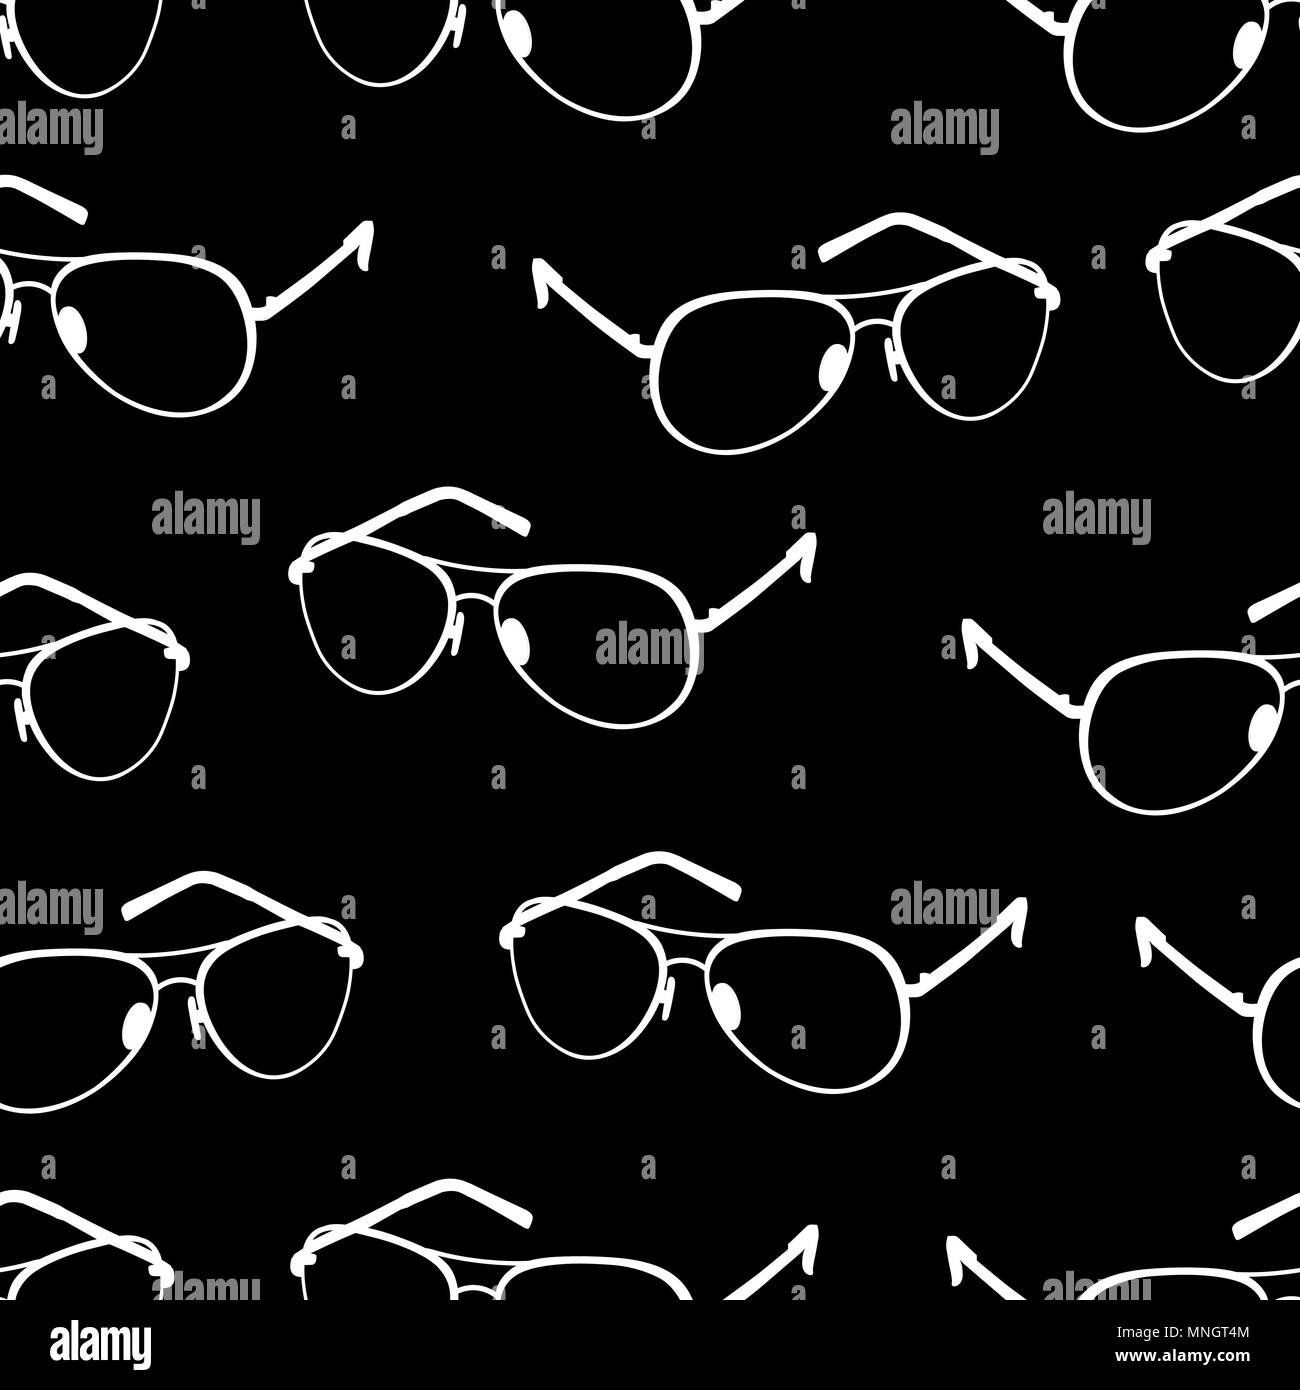 Glasses seamless pattern, monochrome vector background, black and white illustration. Outline contour drawing flat white spectacles on black background. For fabric design, wallpapers, print Stock Vector